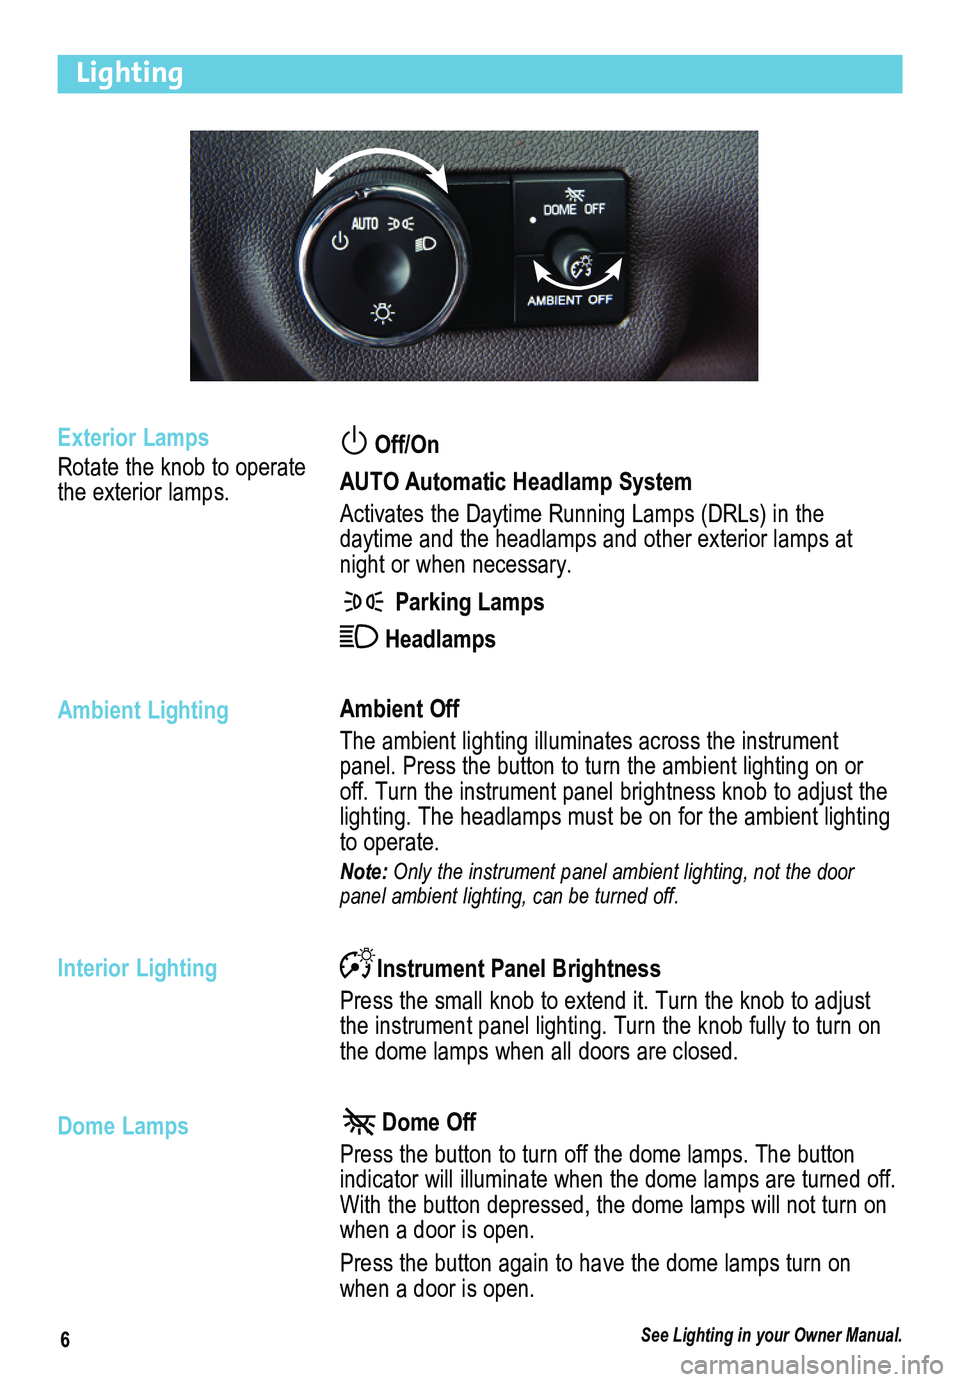 BUICK ENCLAVE 2014  Get To Know Guide 6
Lighting
 Off/On 
AUTO Automatic Headlamp System
Activates the Daytime Running Lamps (DRLs) in the  
daytime and the headlamps and other exterior lamps at night or when necessary.
 Parking Lamps
 He